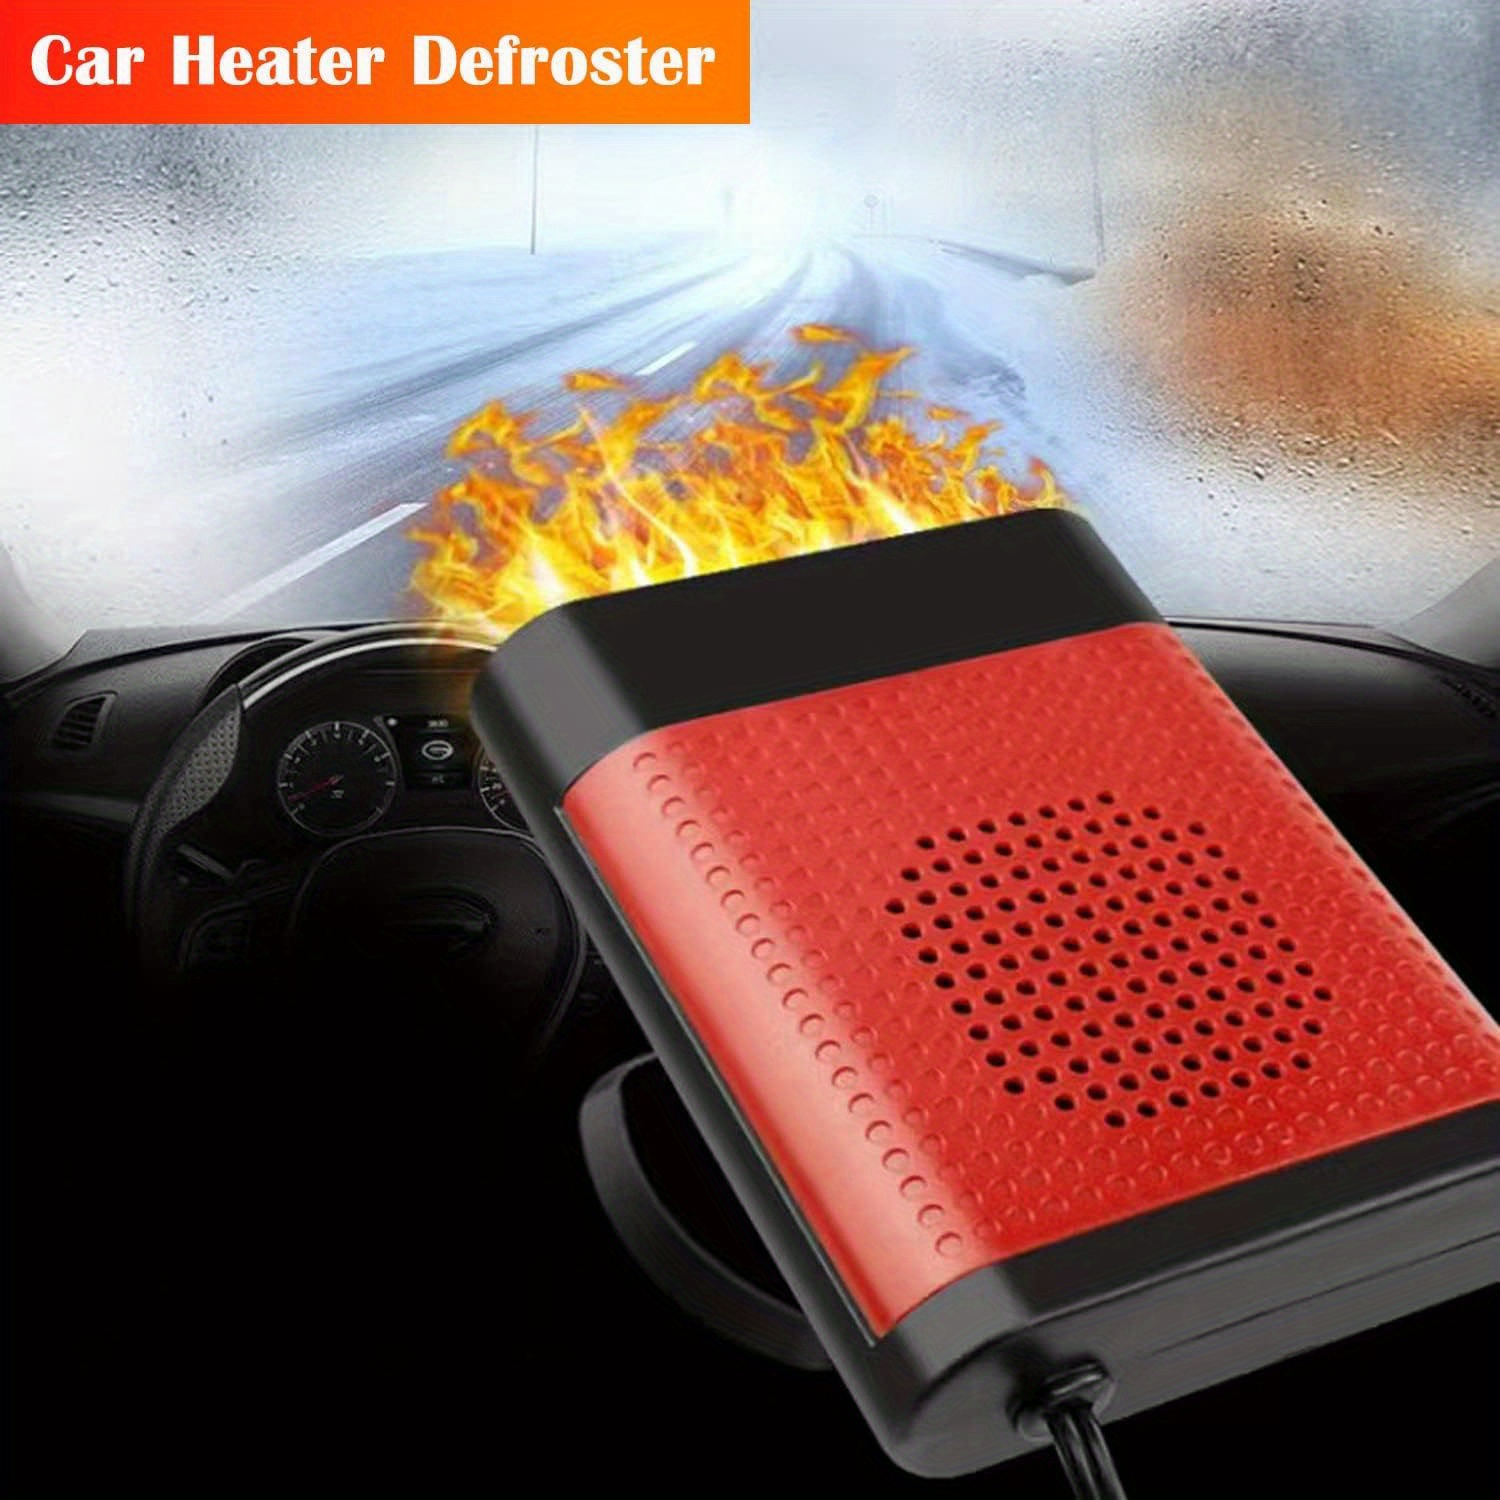 Window Defroster For Car - 12 Volt Car Heater - Compact Window